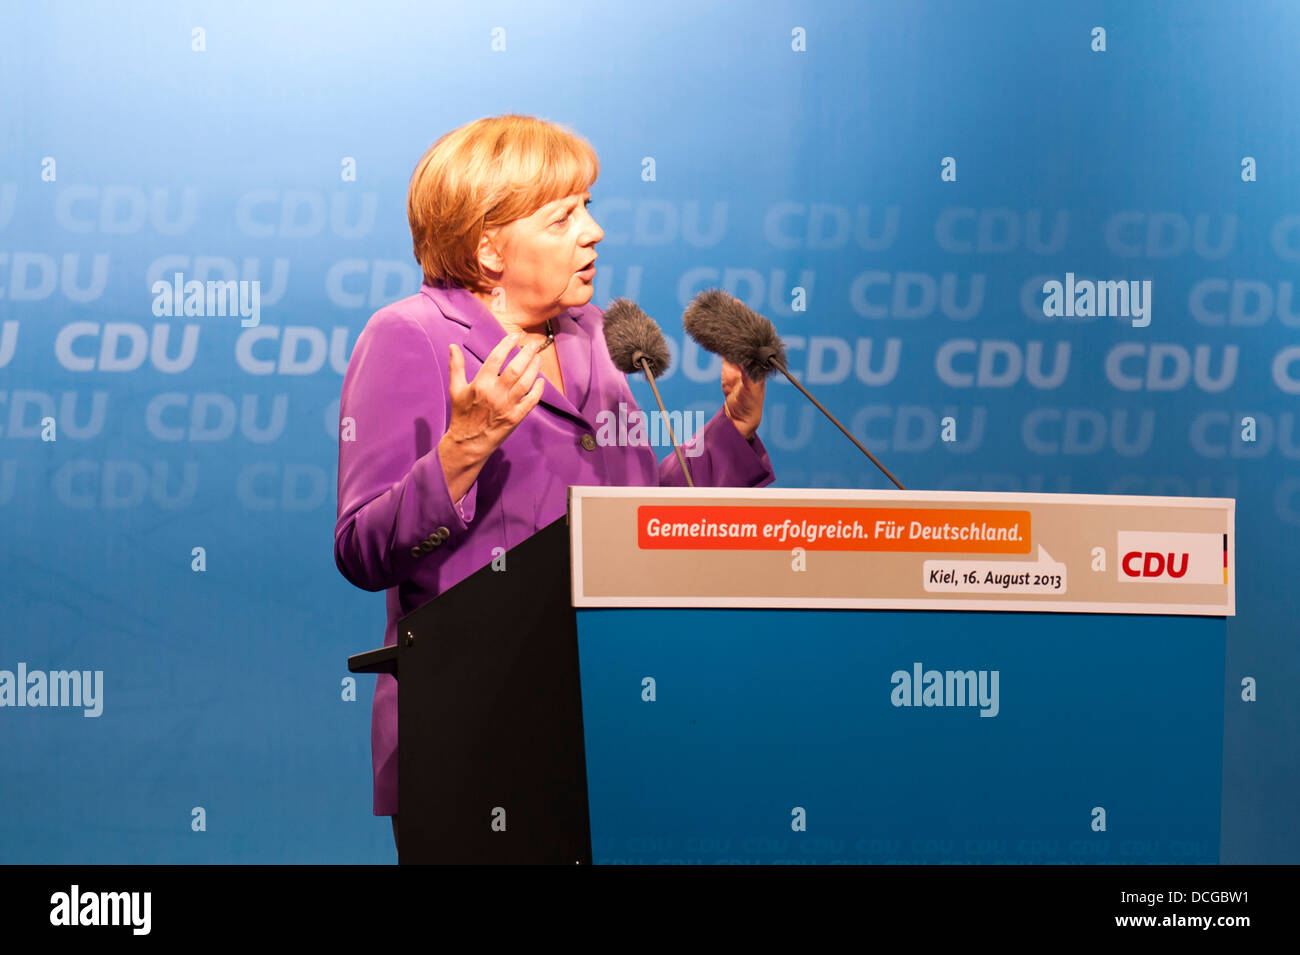 German Chancellor Angela Merkel during an election campaign event on 16.08.2013 in Kiel Stock Photo